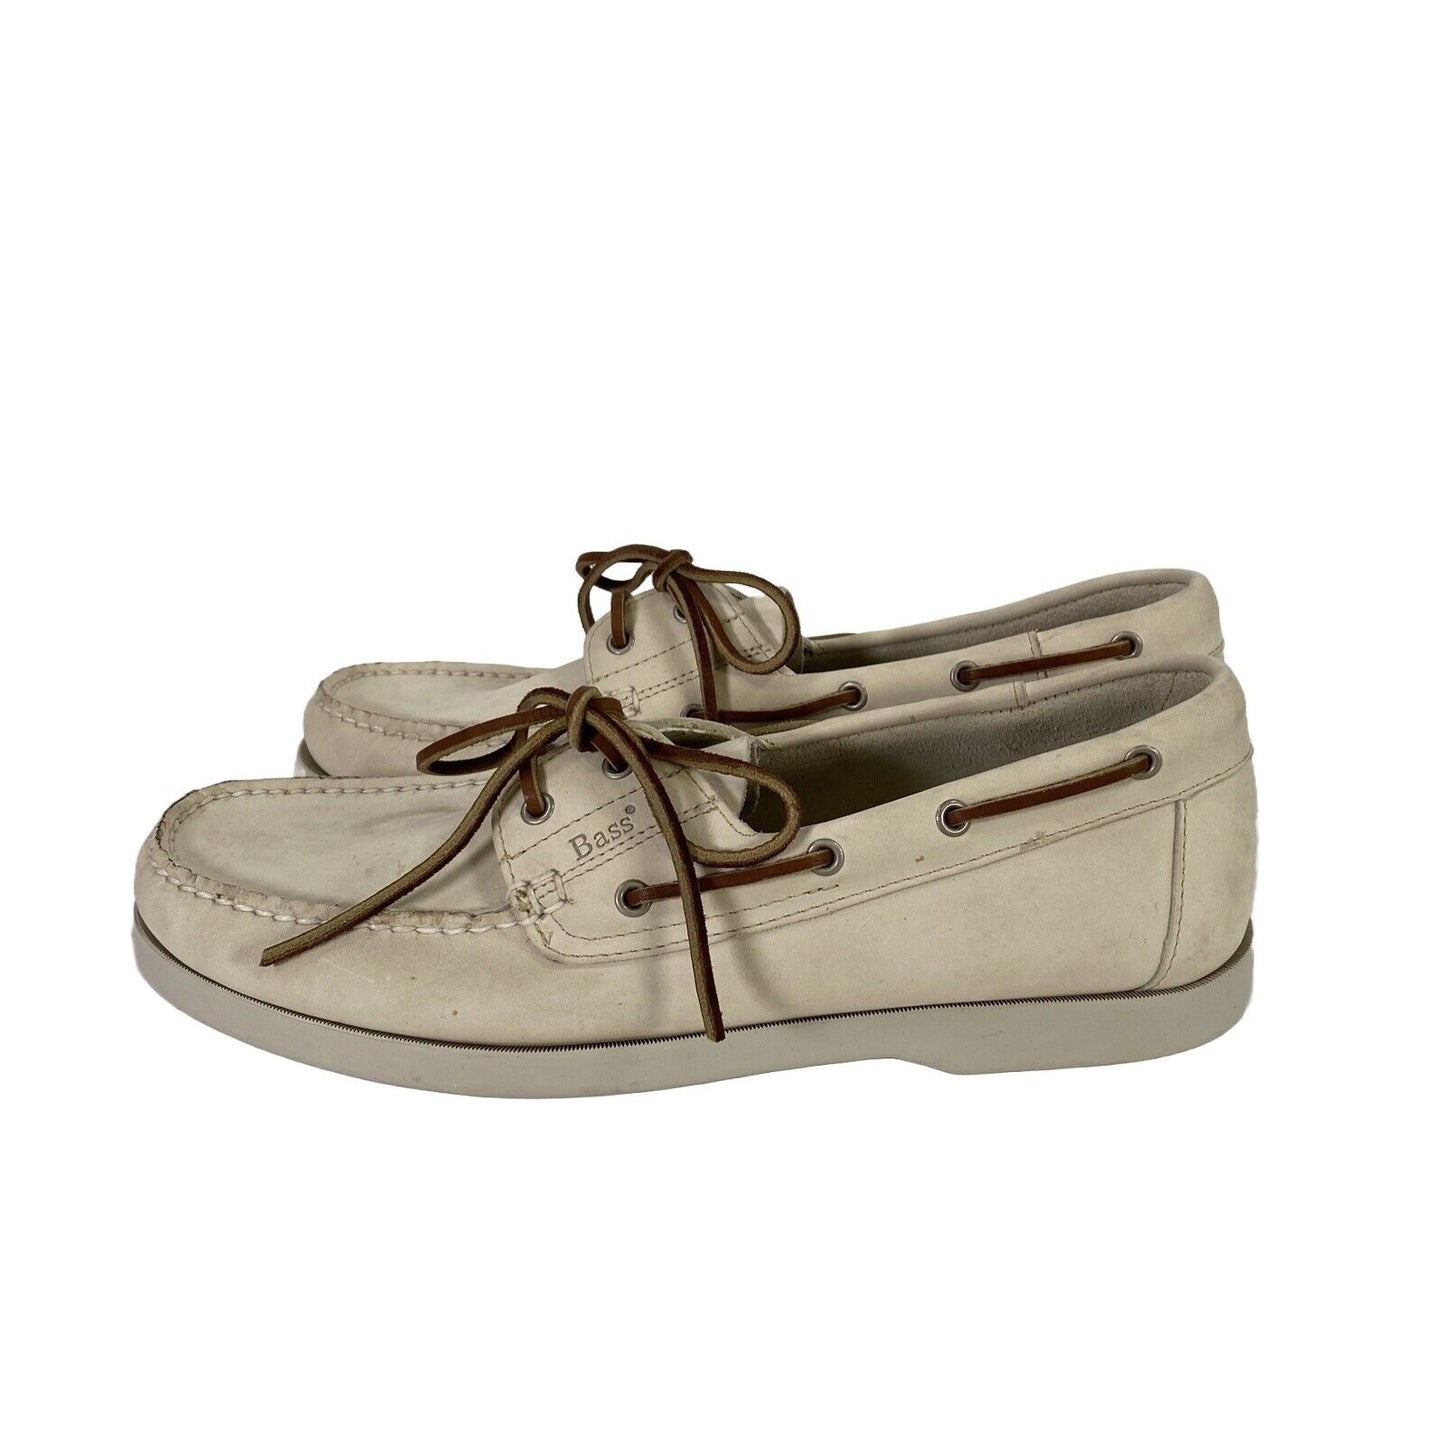 Bass Men's Ivory Seafarer Casual Boat Shoes - 10